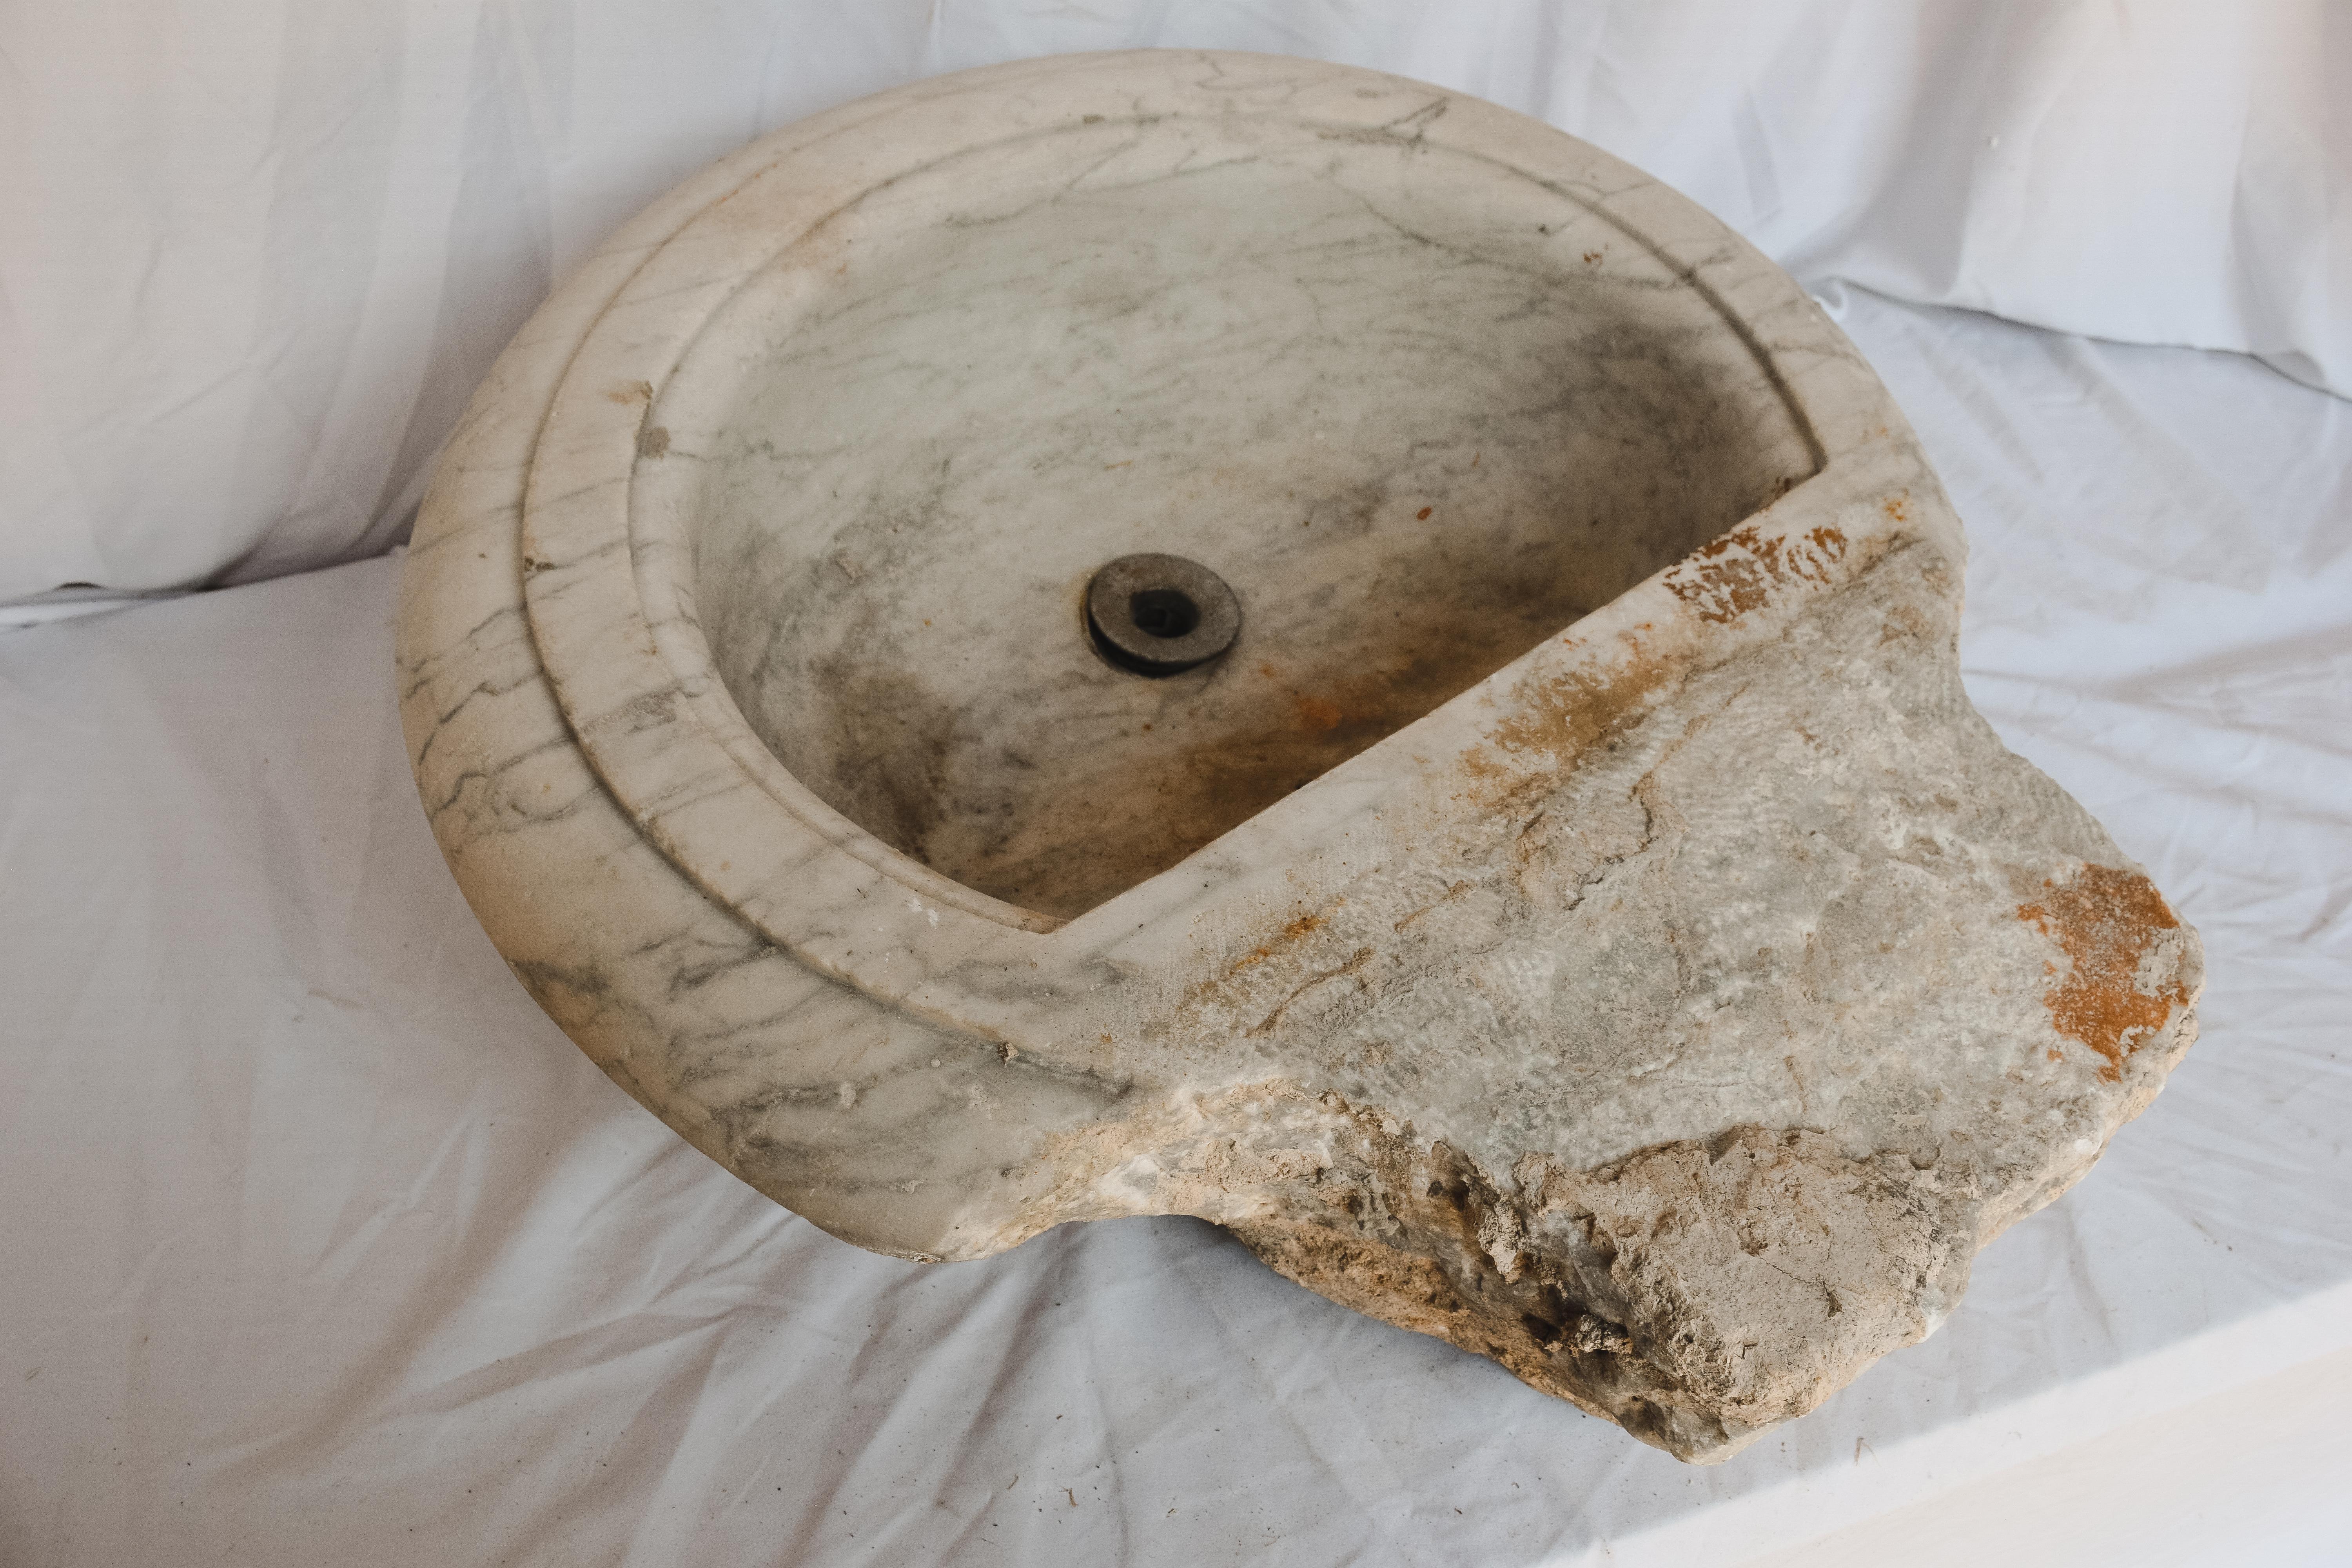 19th Century Antique White Marble Sink For Sale